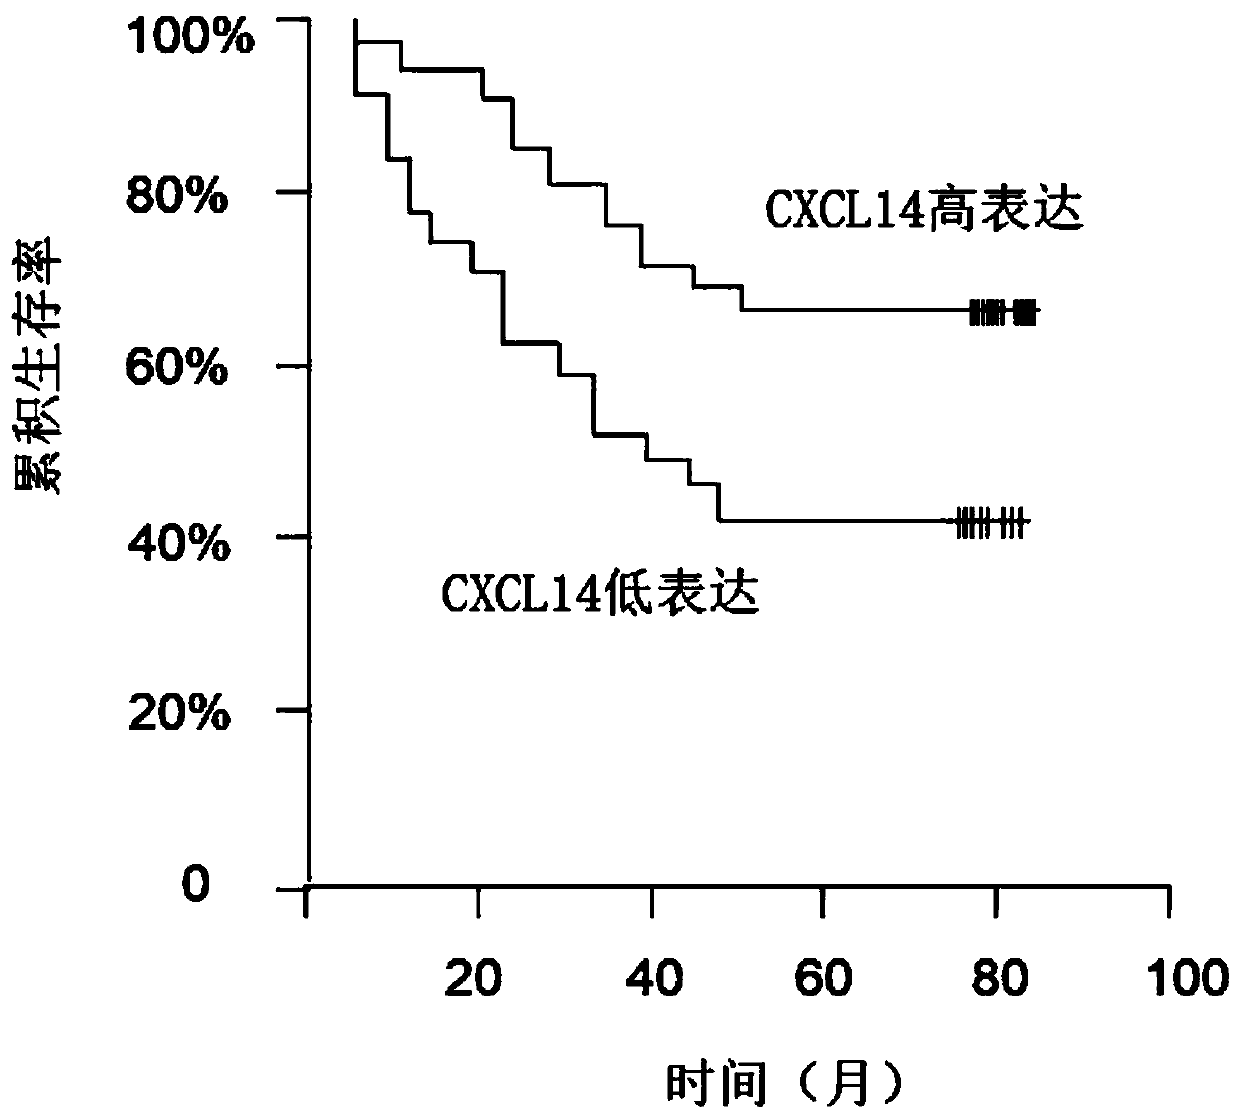 Application of chemokine CXCL14 in predicting prognosis of colon cancer